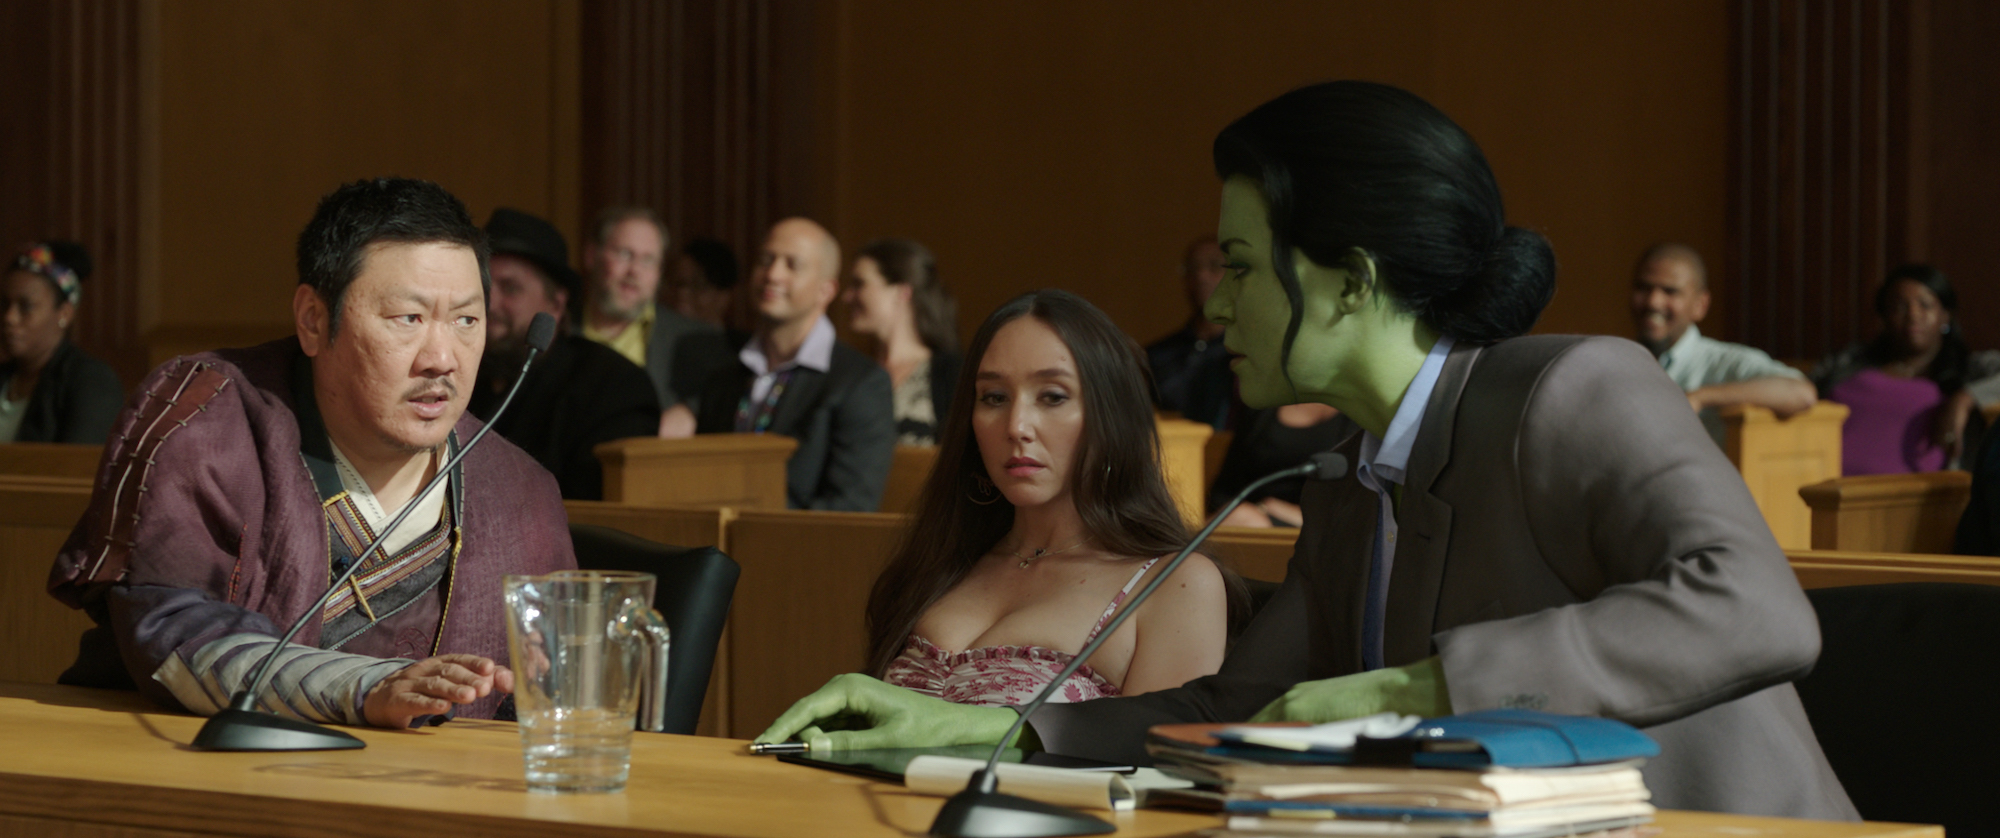 ‘She-Hulk: Attorney at Law’ Episode Four Review: “Is This Not Real Magic?”